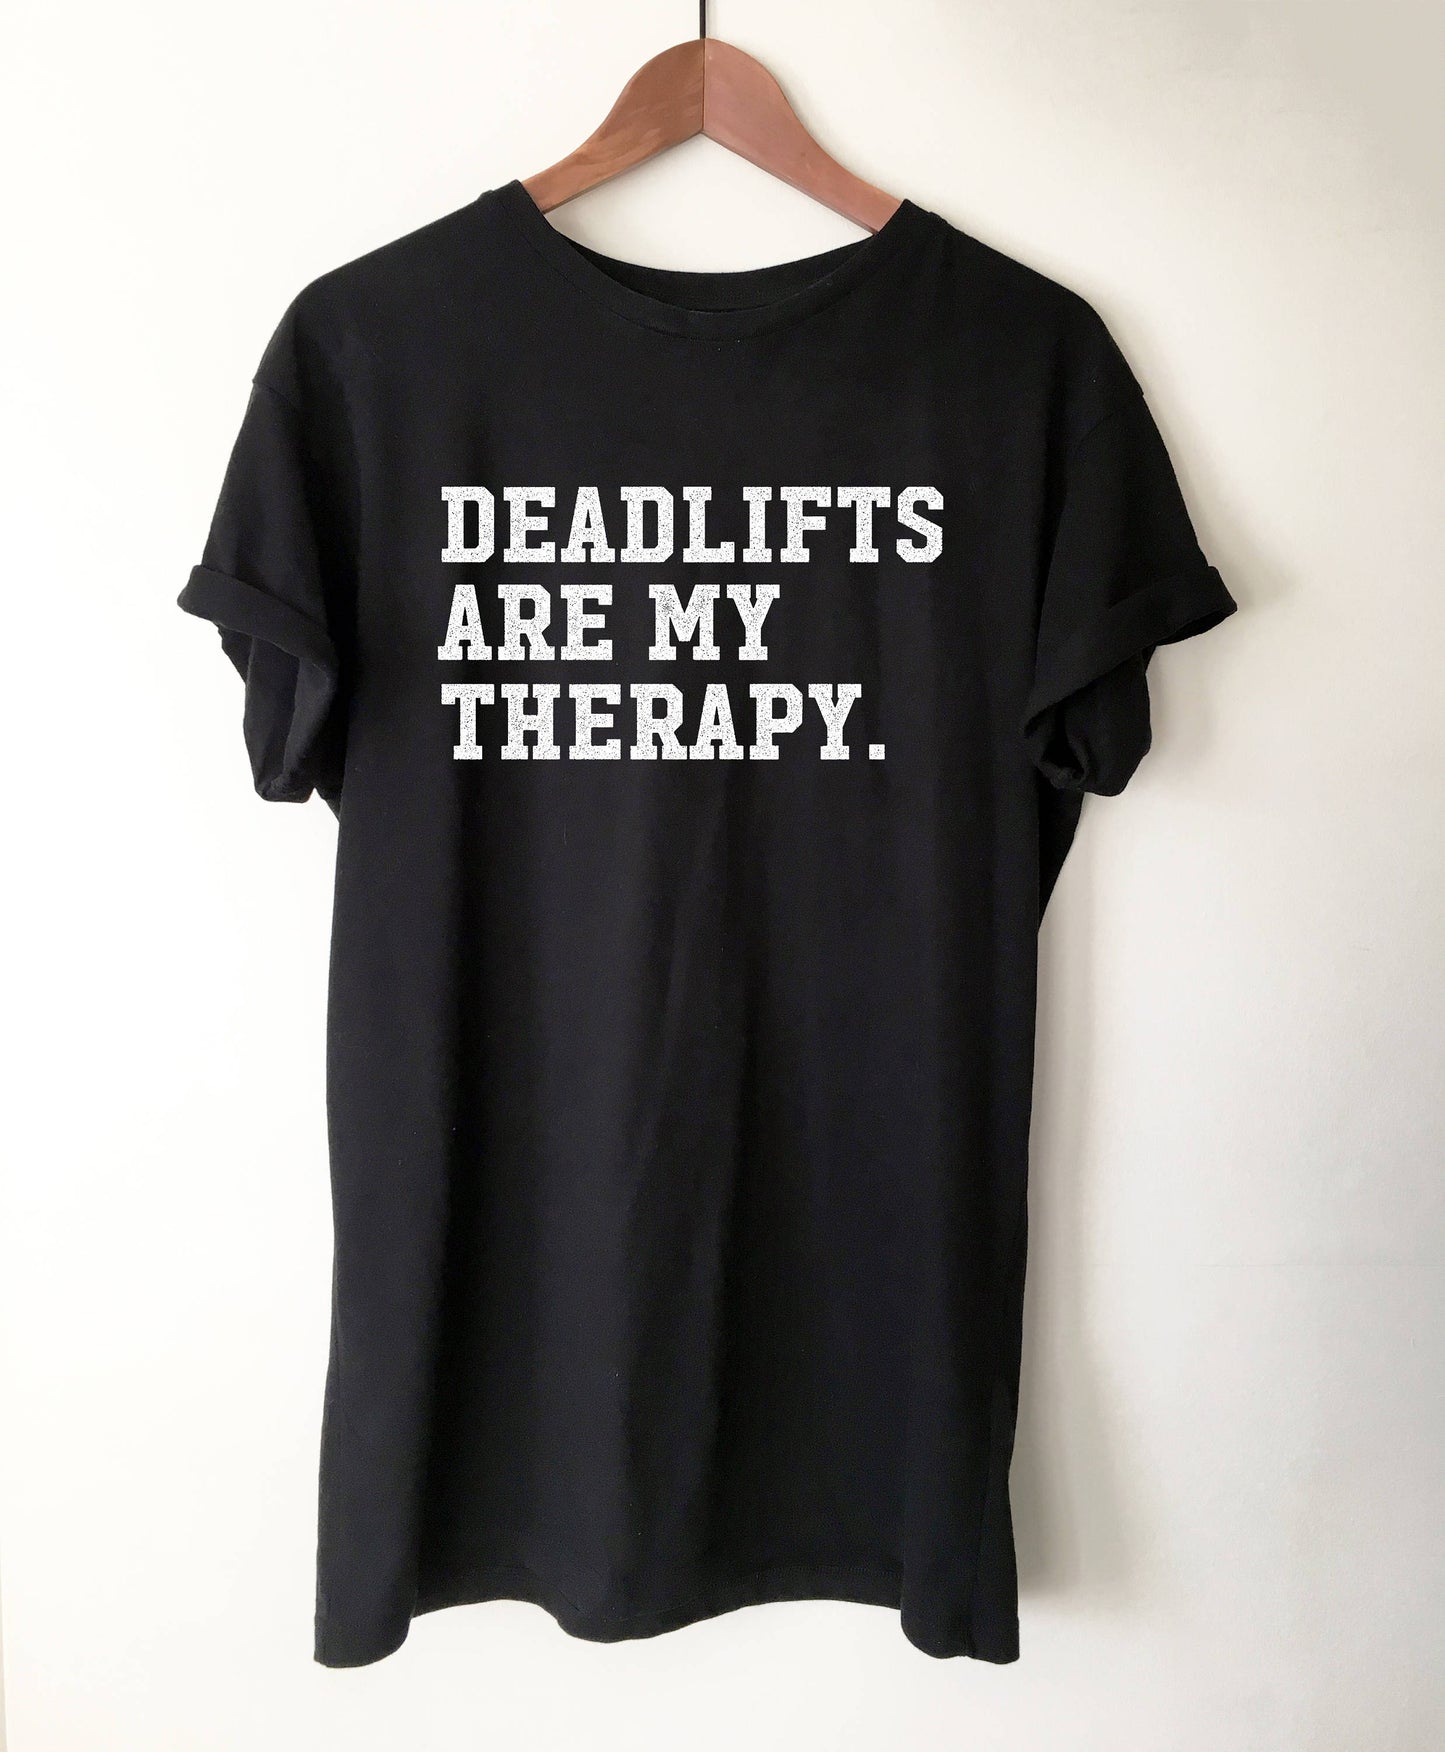 Deadlifts Are My Therapy Unisex Shirt - Gym shirt, Workout shirt, Deadlift shirt, Booty day, Weightlifting shirt, Bodybuilding, Powerlifting